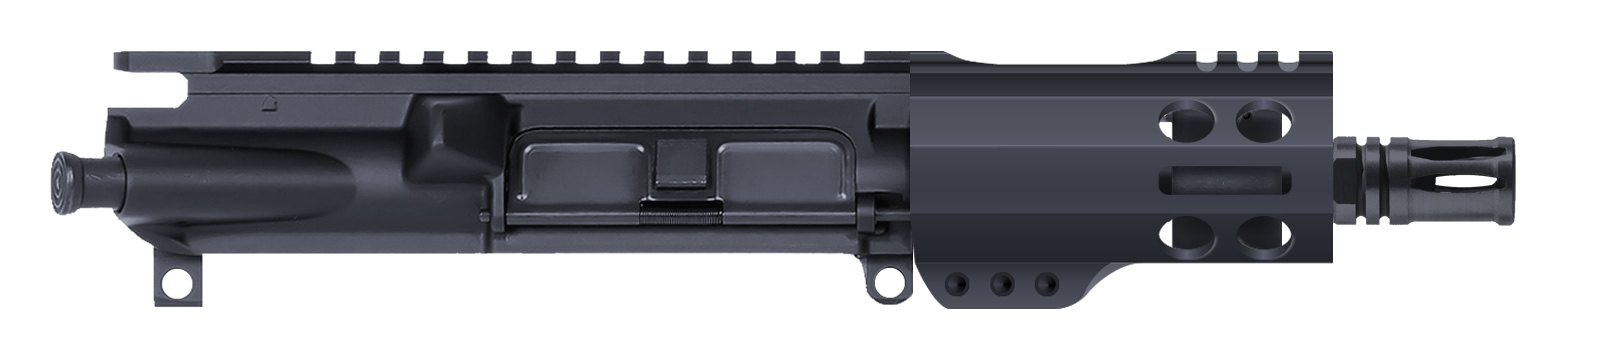 ar15-upper-assembly-5-inch-300-aac-black